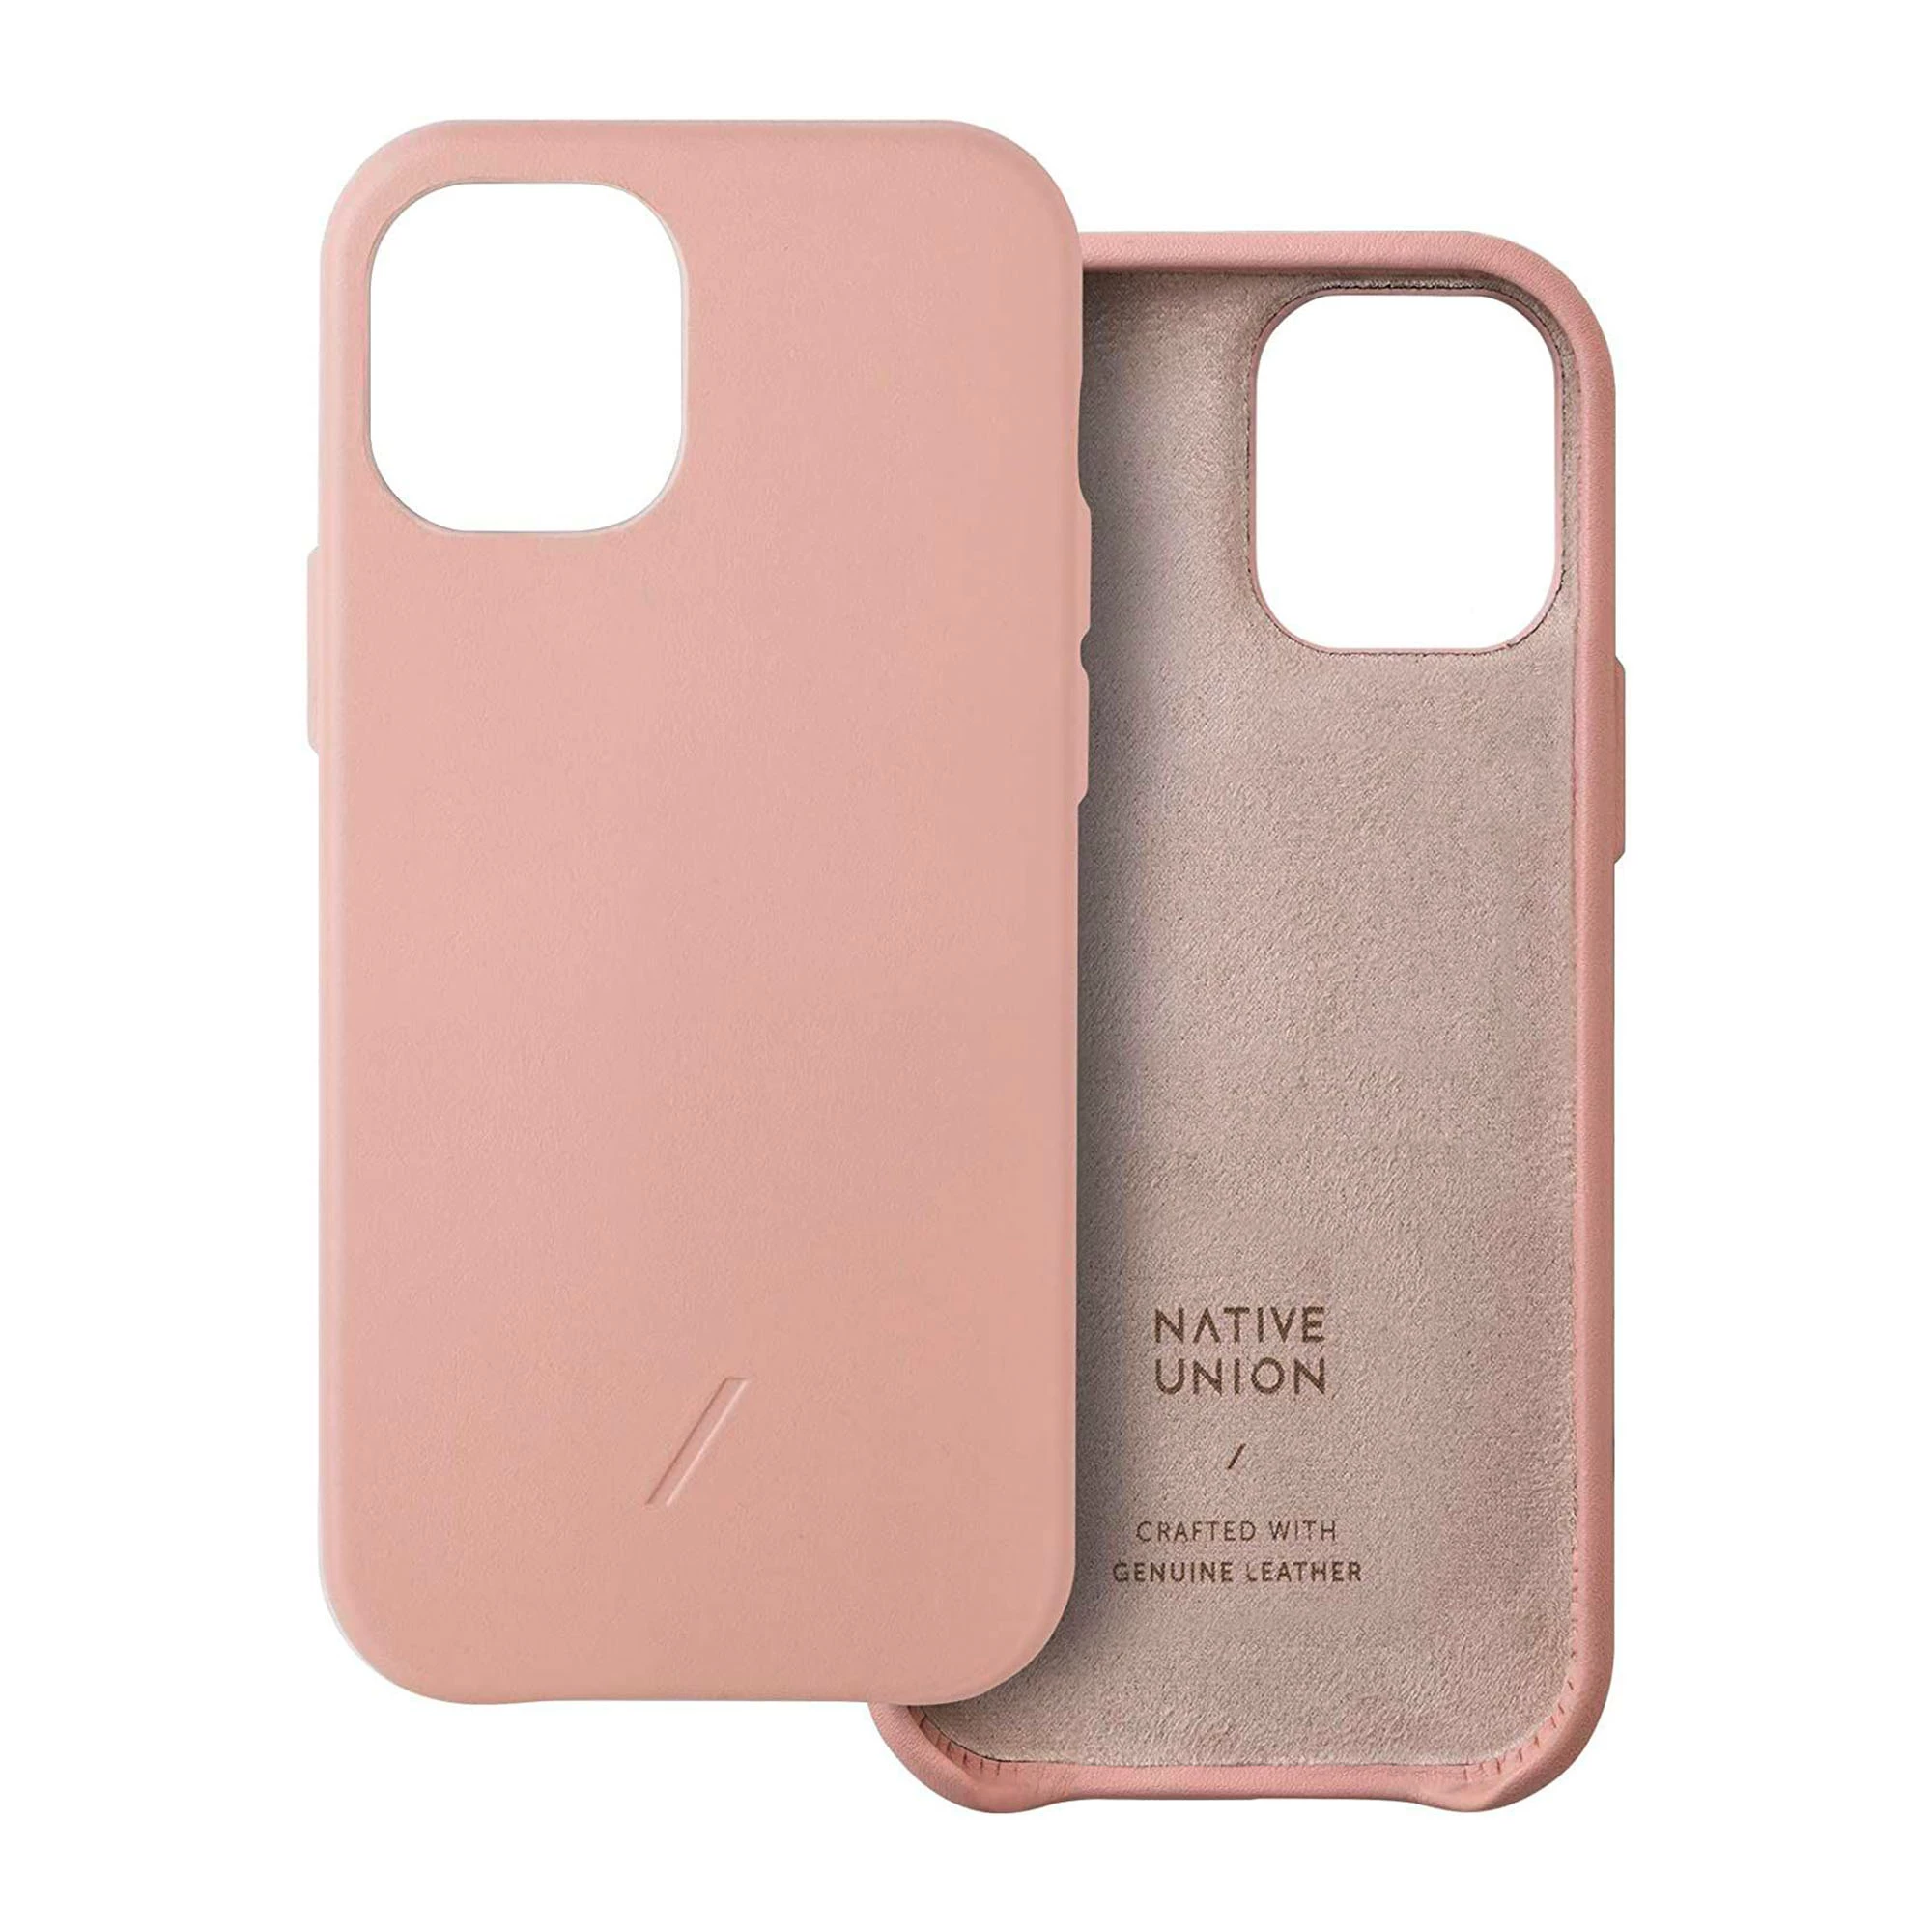 Native Union Clic Classic Case for iPhone 12 Pro Max - Rose (CCLAS-NUD-NP20L)